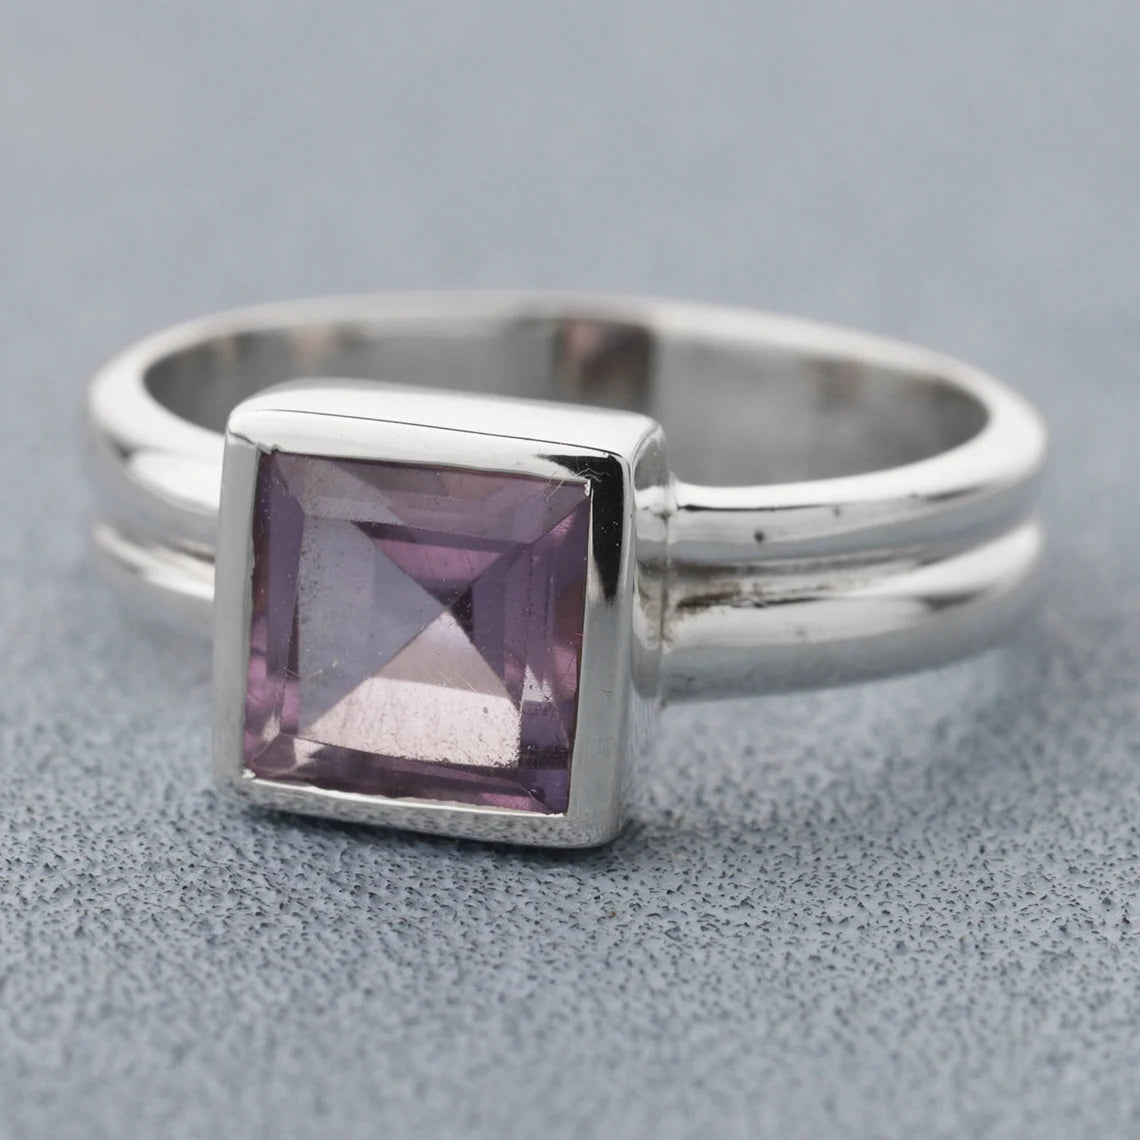 Natural Amethyst Gemstone Ring - 925 Sterling Silver Ring - Size 5 To 12 US - February Birthstone Ring - Trendy Ring - Amethyst Ring